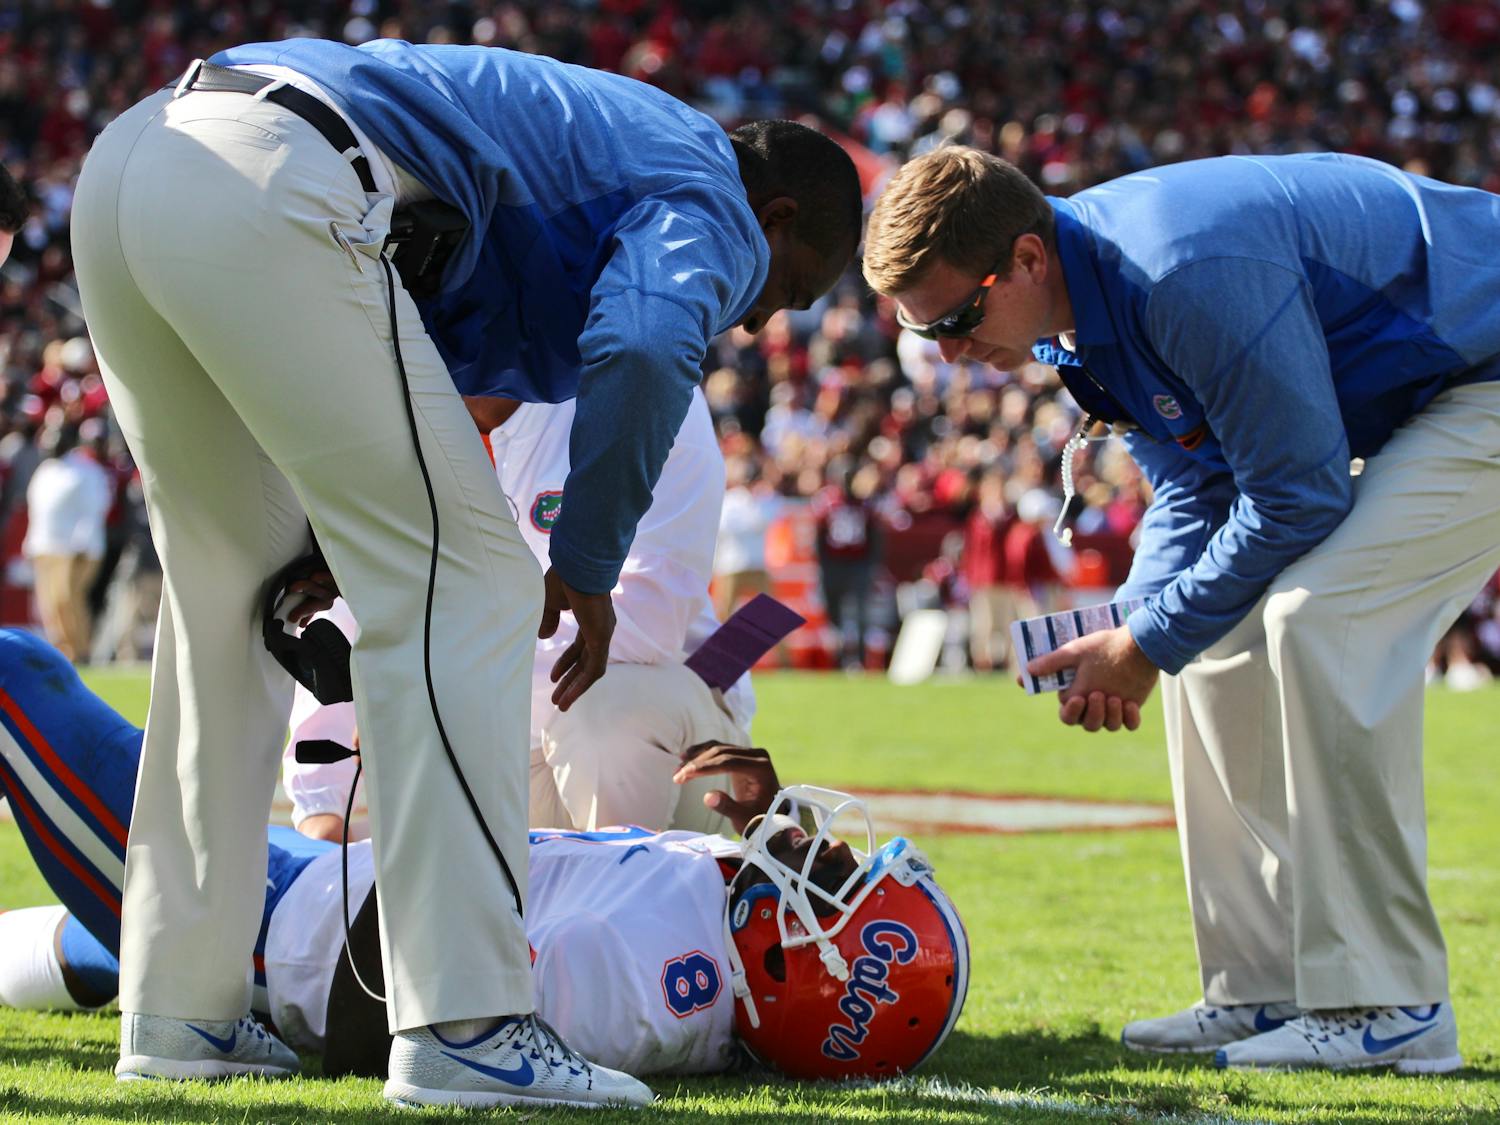 Malik Zaire injured his knee during Saturday's 28-20 loss to South Carolina at Williams-Brice Stadium. After the initial injury, Zaire returned to the game two plays earlier, only to crumble after taking the snap and shifting his weight to left leg.